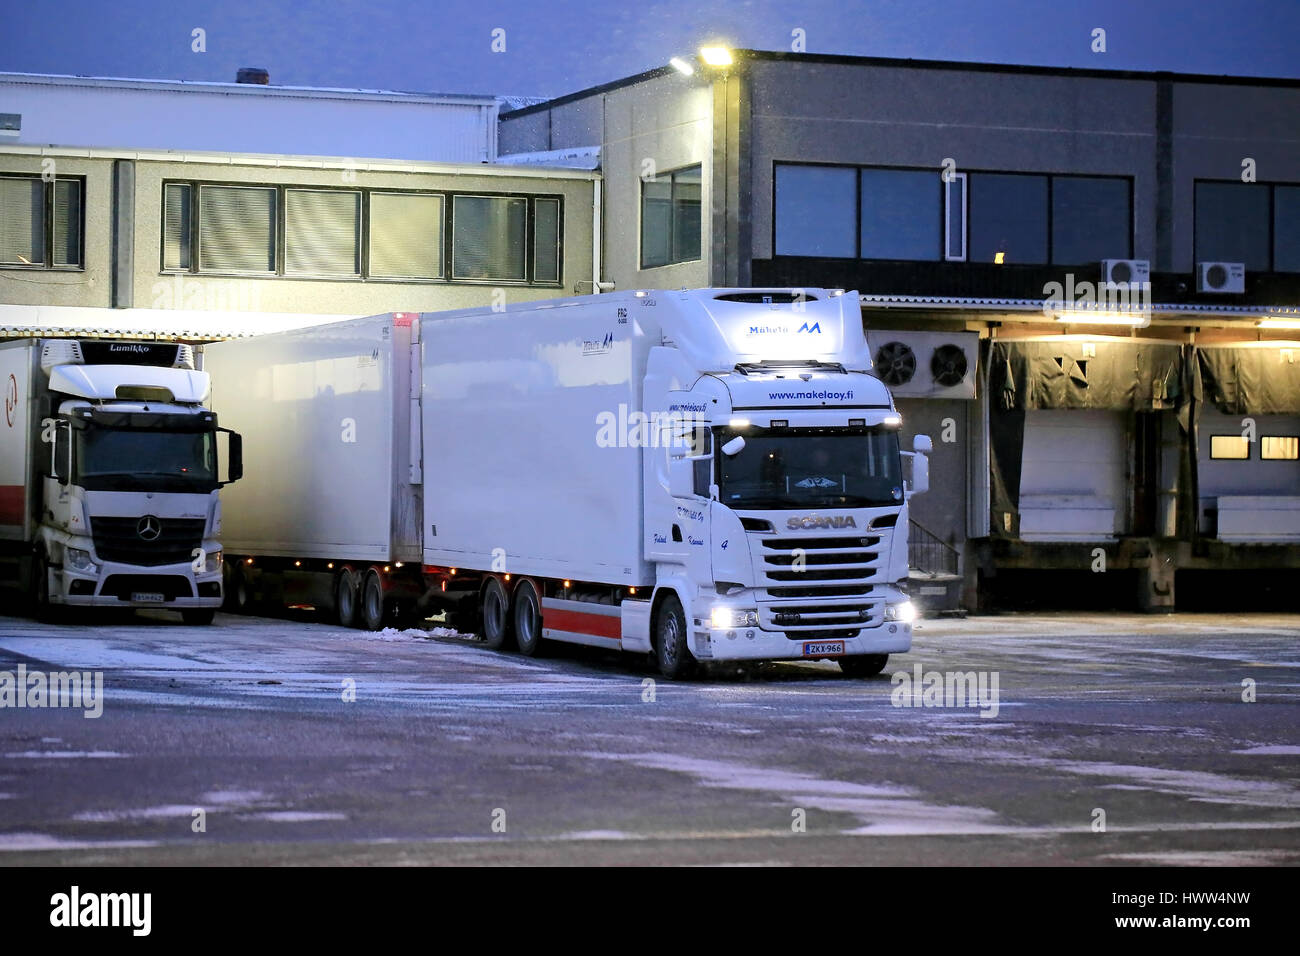 SALO, FINLAND - NOVEMBER 27, 2016: Big white refrigerated trailer truck ready to unload at warehause in winter evening snowfall. Stock Photo